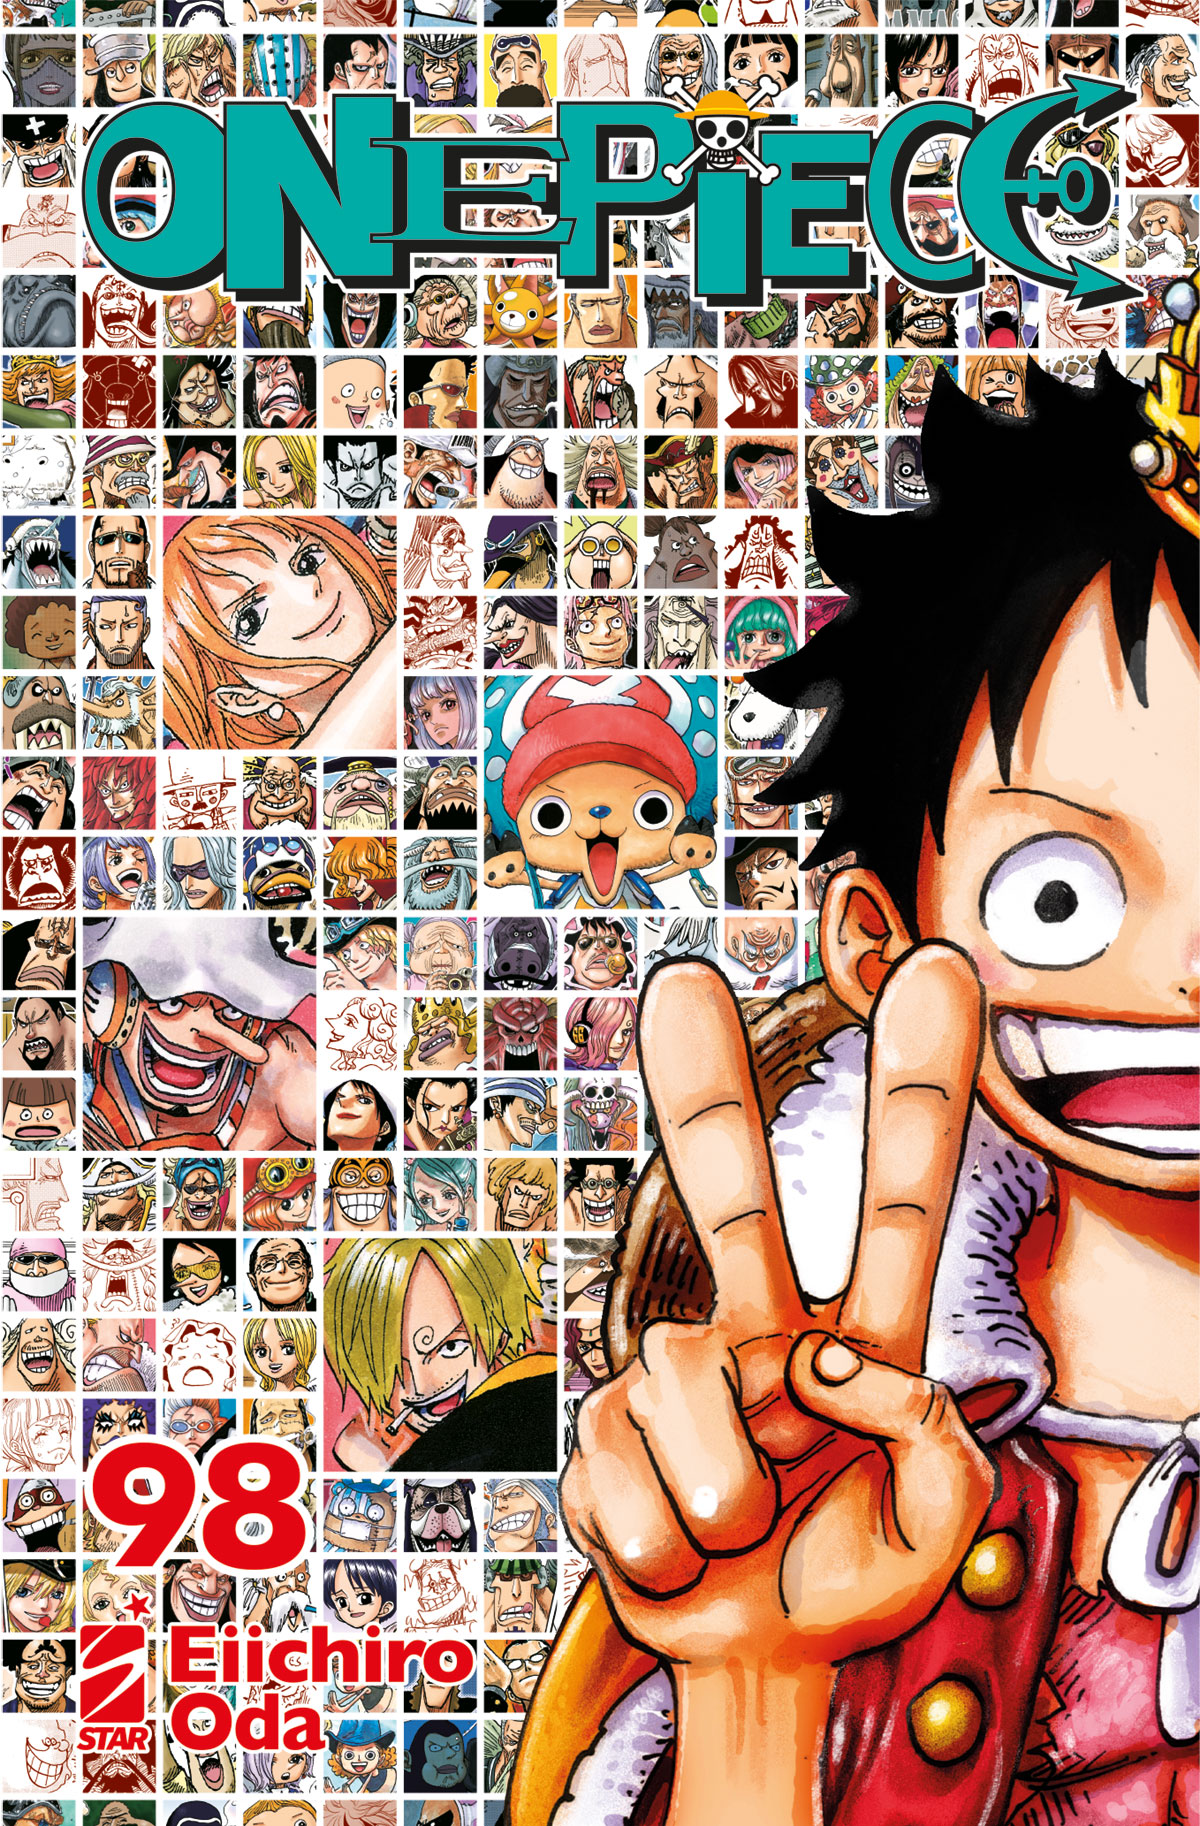 YOUNG #324 ONE PIECE N.98 VARIANT